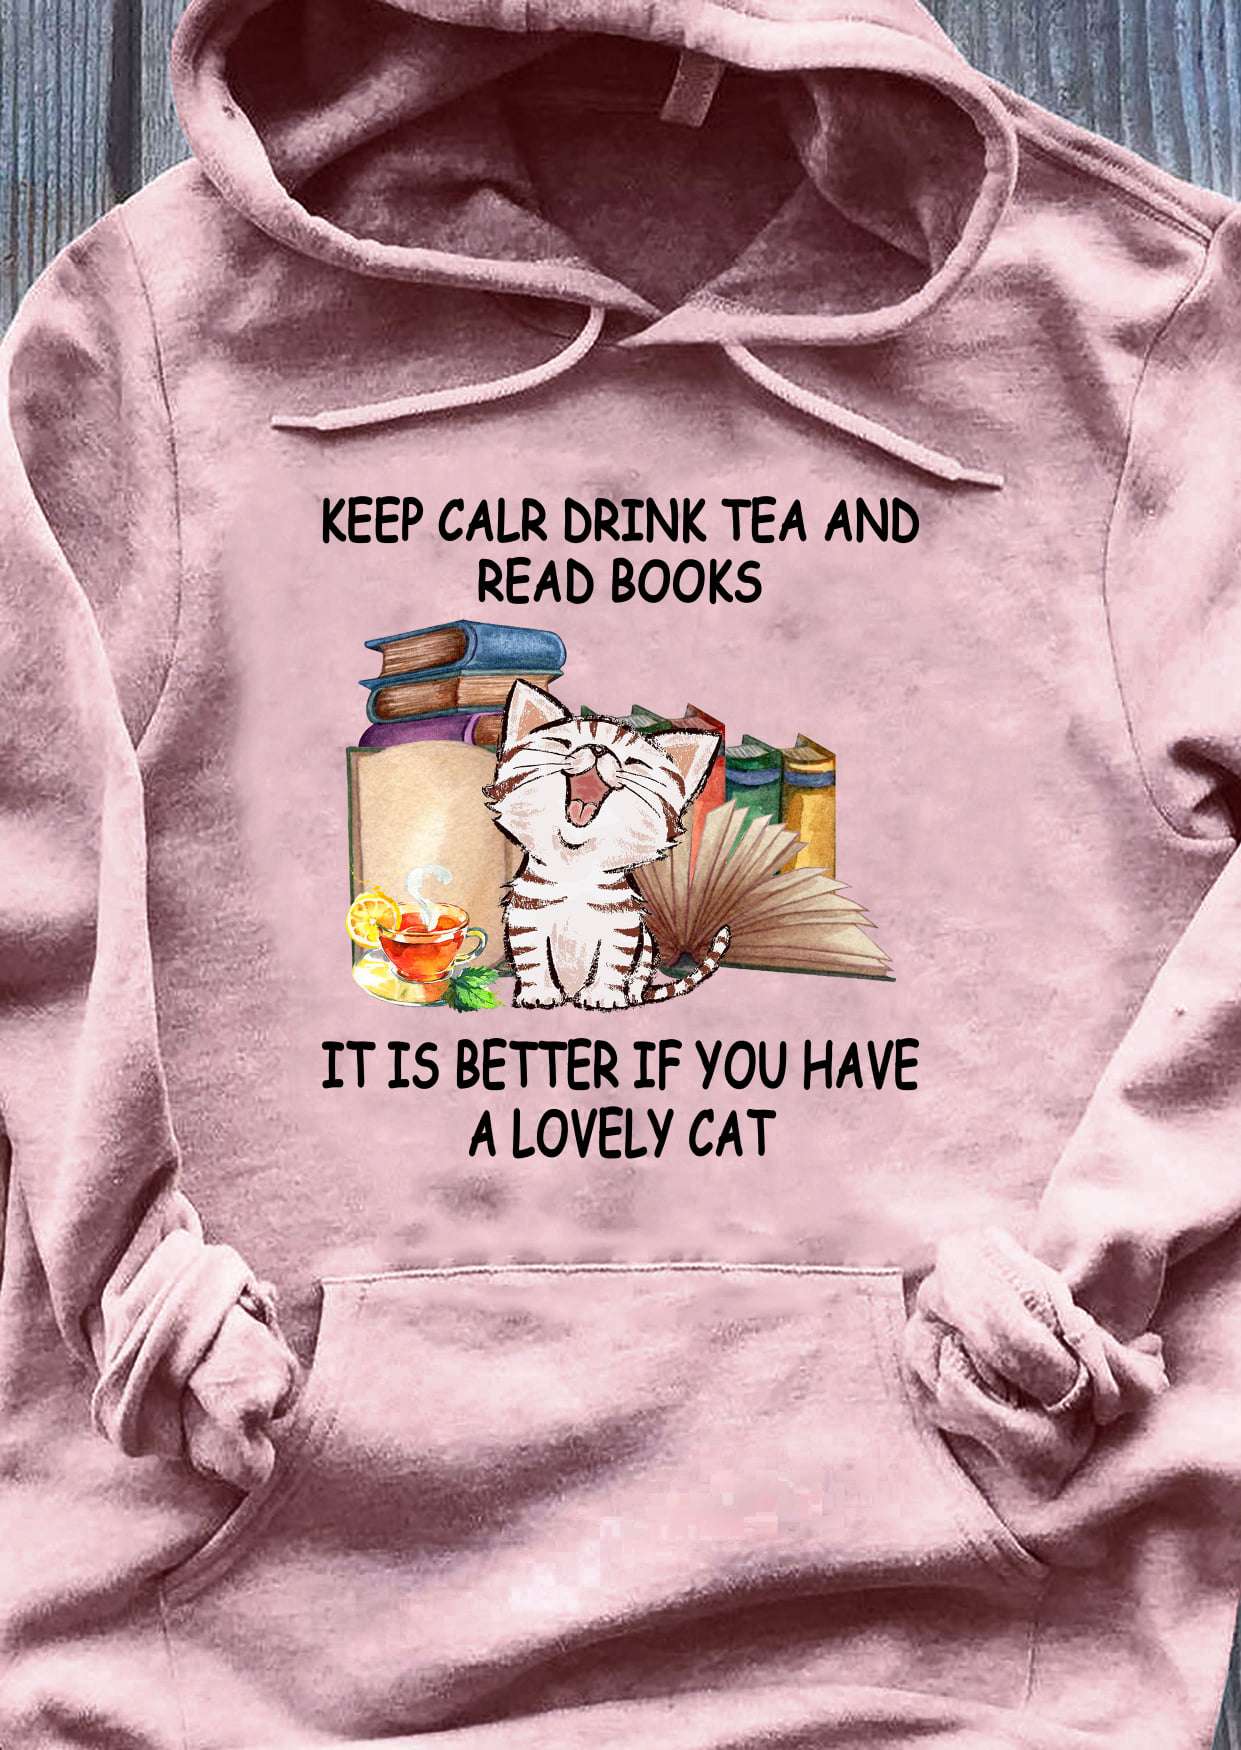 Keep calr drink tea and read books it is better if you have a lovely cat - Cat and books